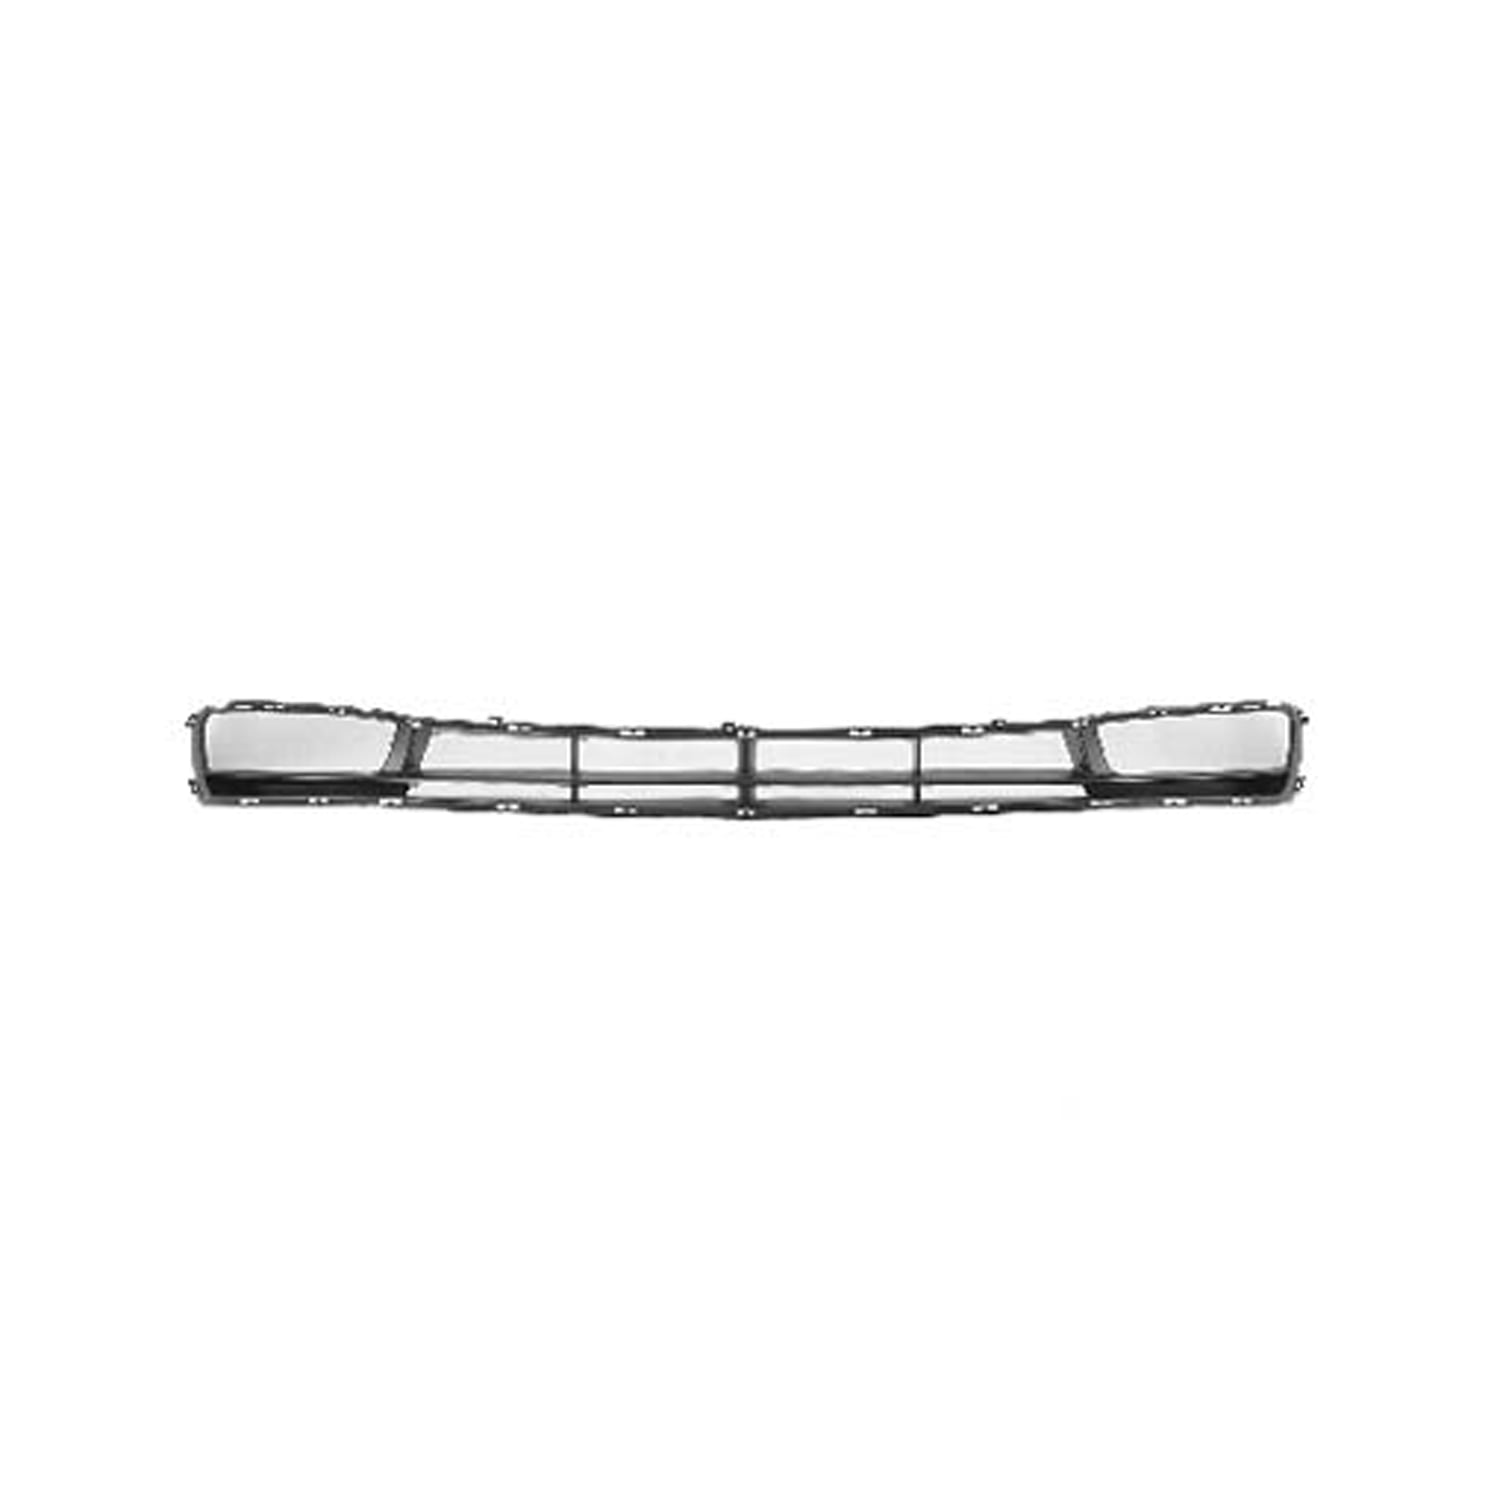 Lower Front Bumper Grille For 2007-2011 Hyundai Accent